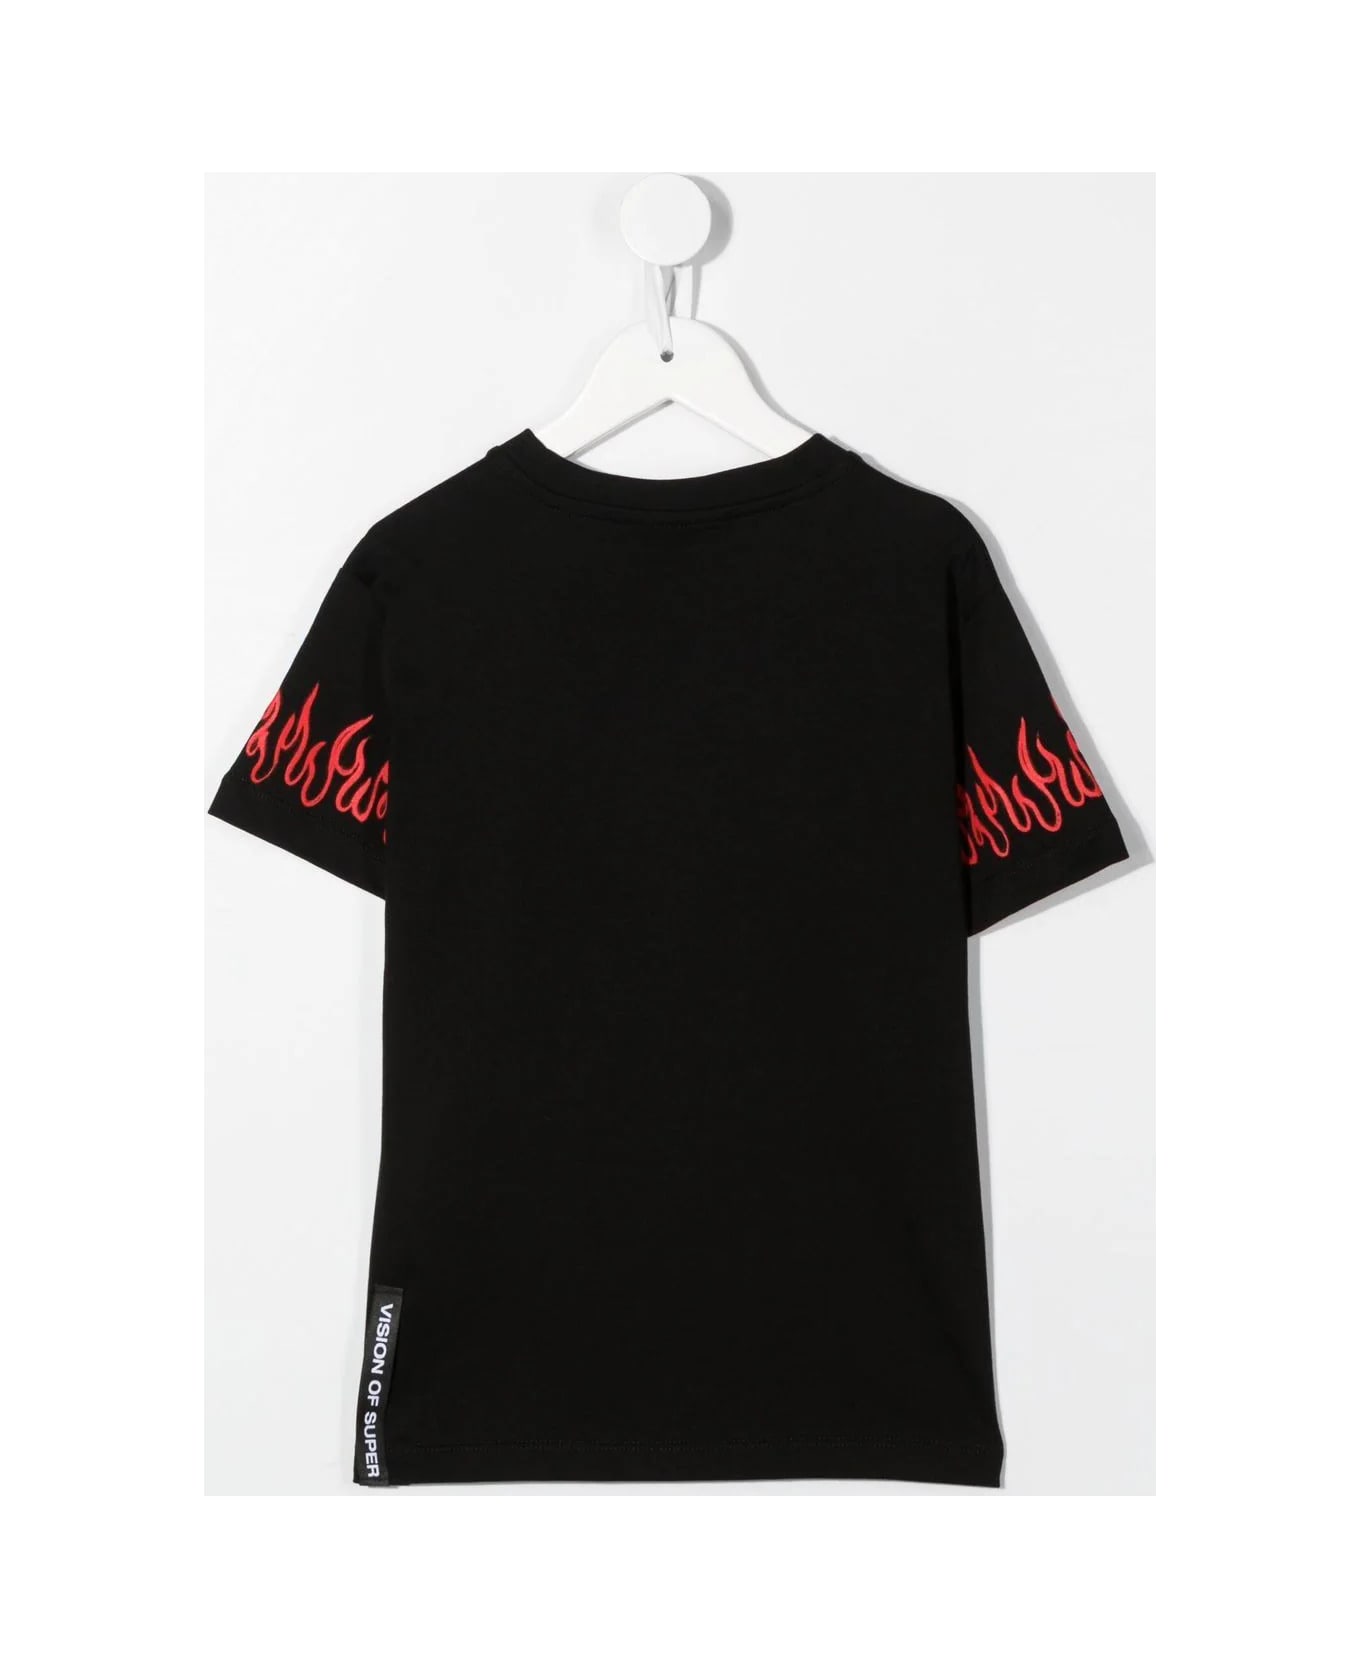 Vision of Super Black Kids T-shirt With Logo And Red Spray Flames Print - Black